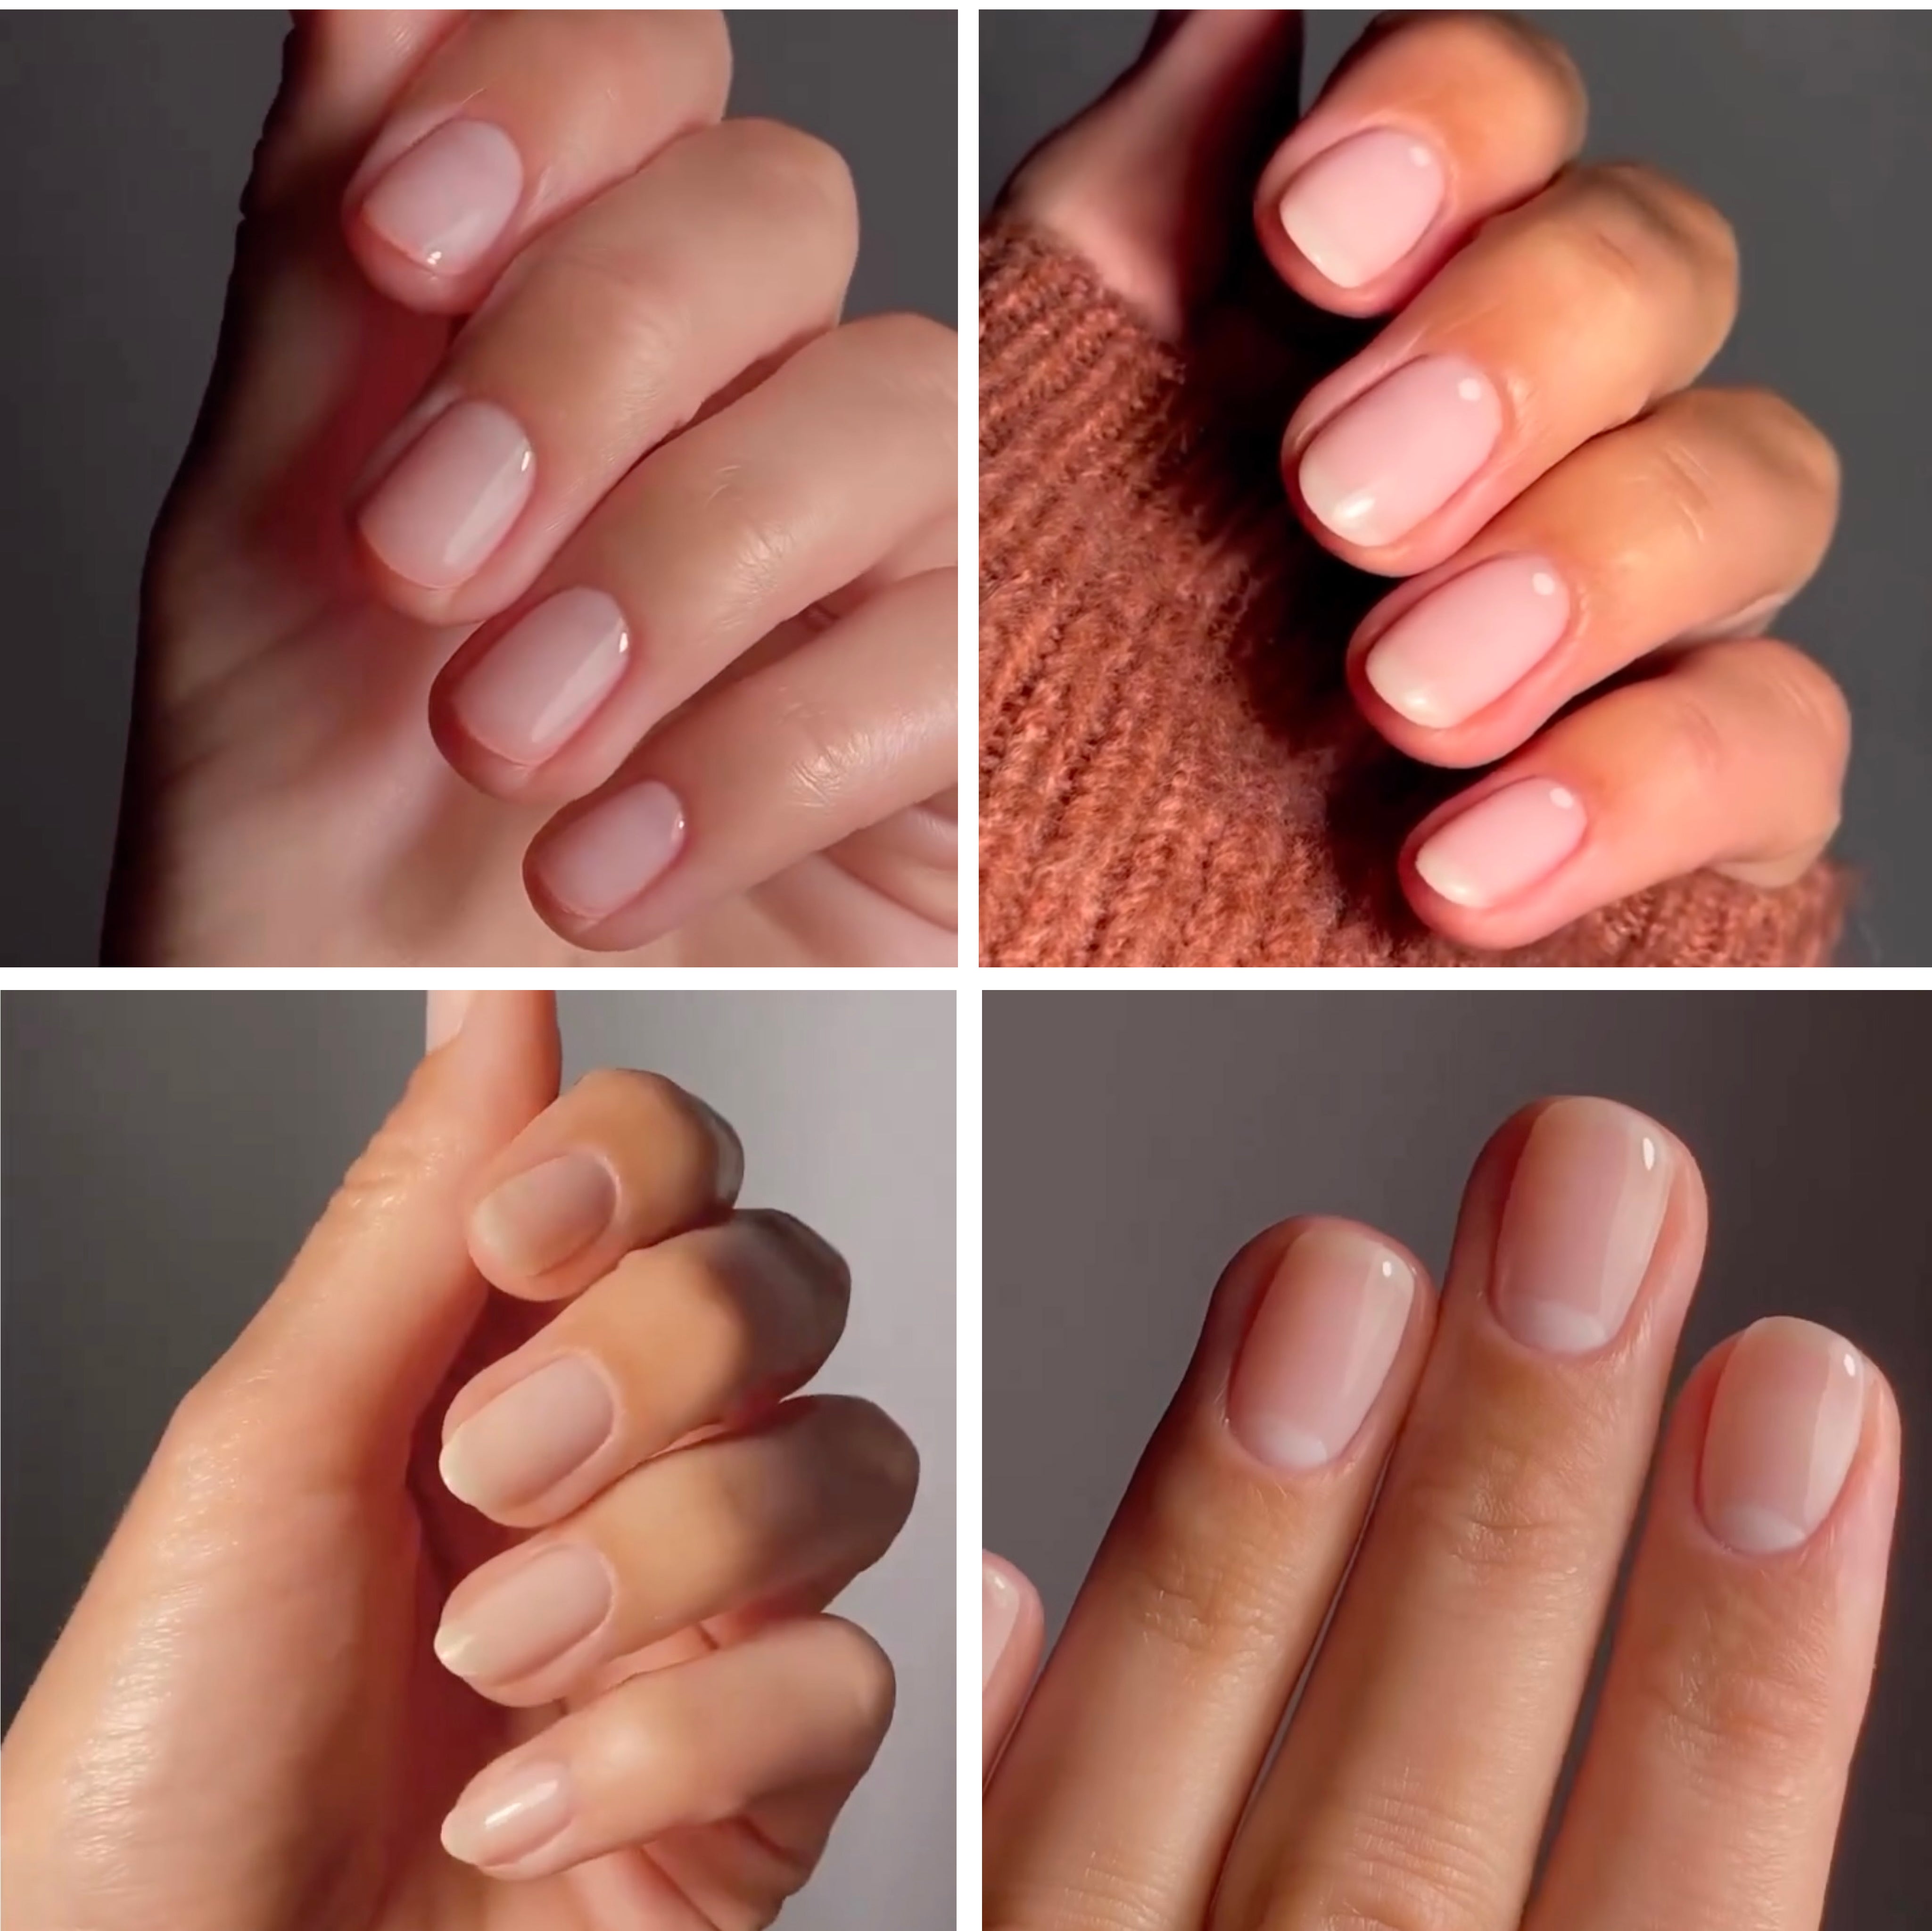 How to know if your nails need care - Times of India